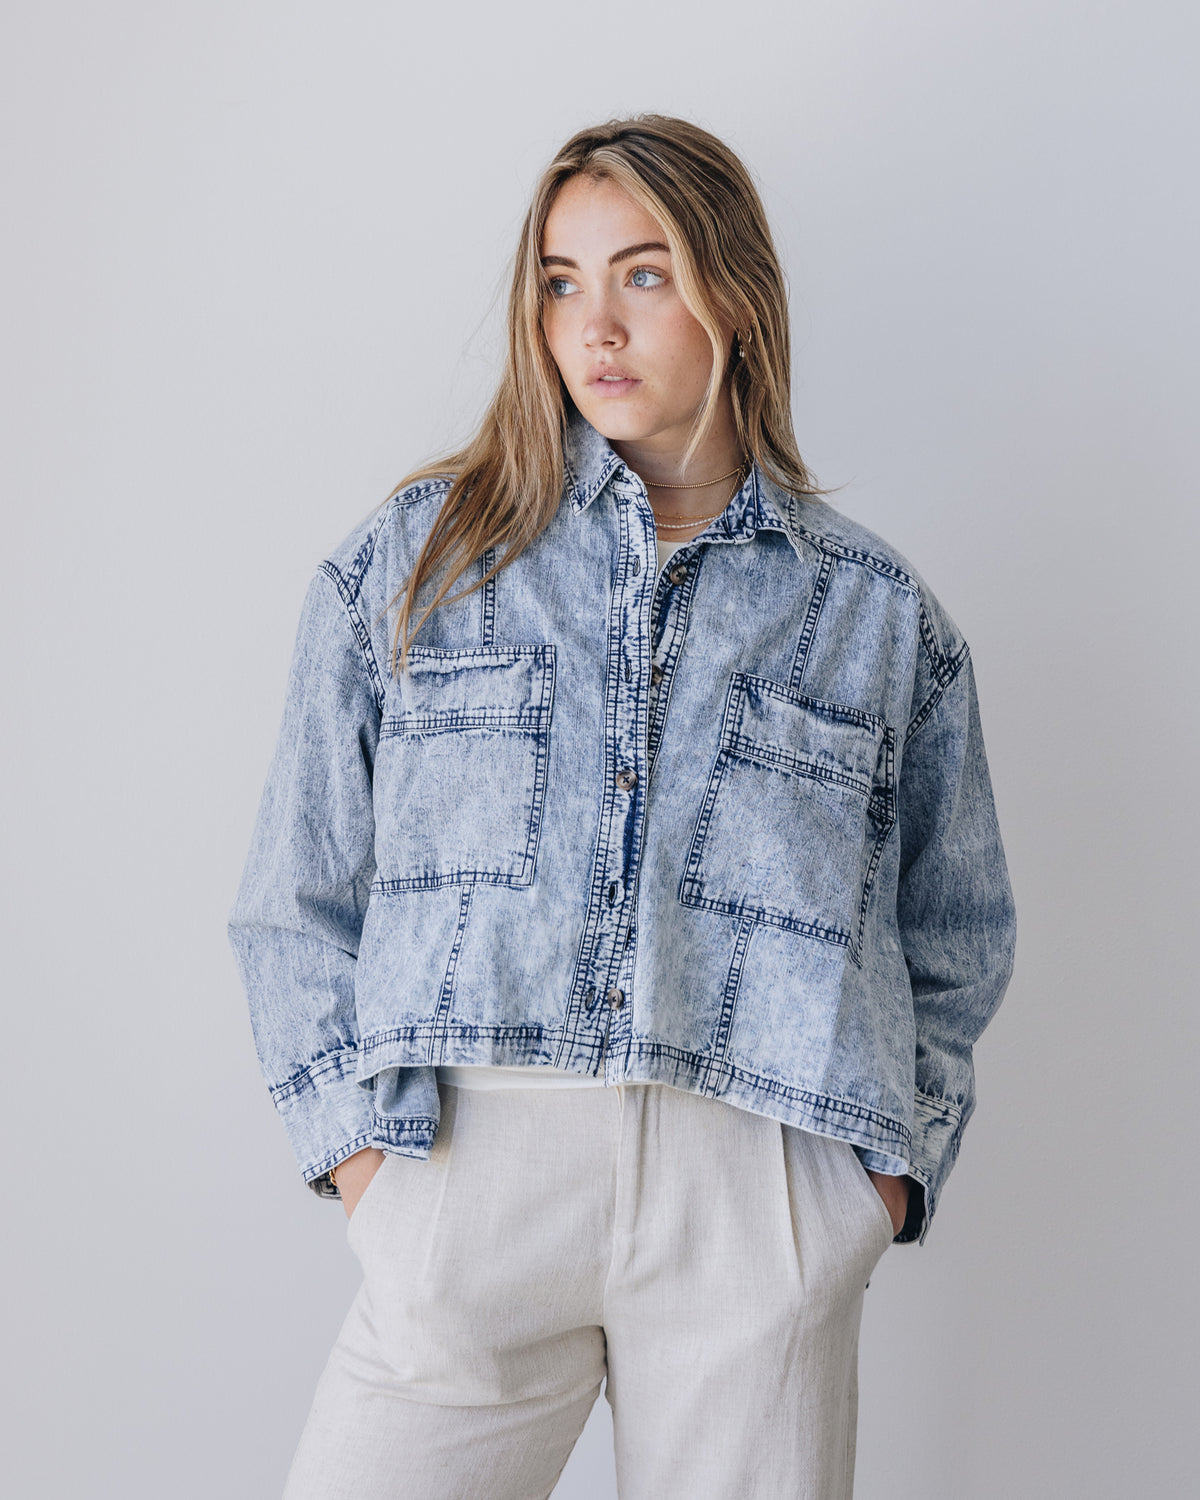 Back To You Denim Top